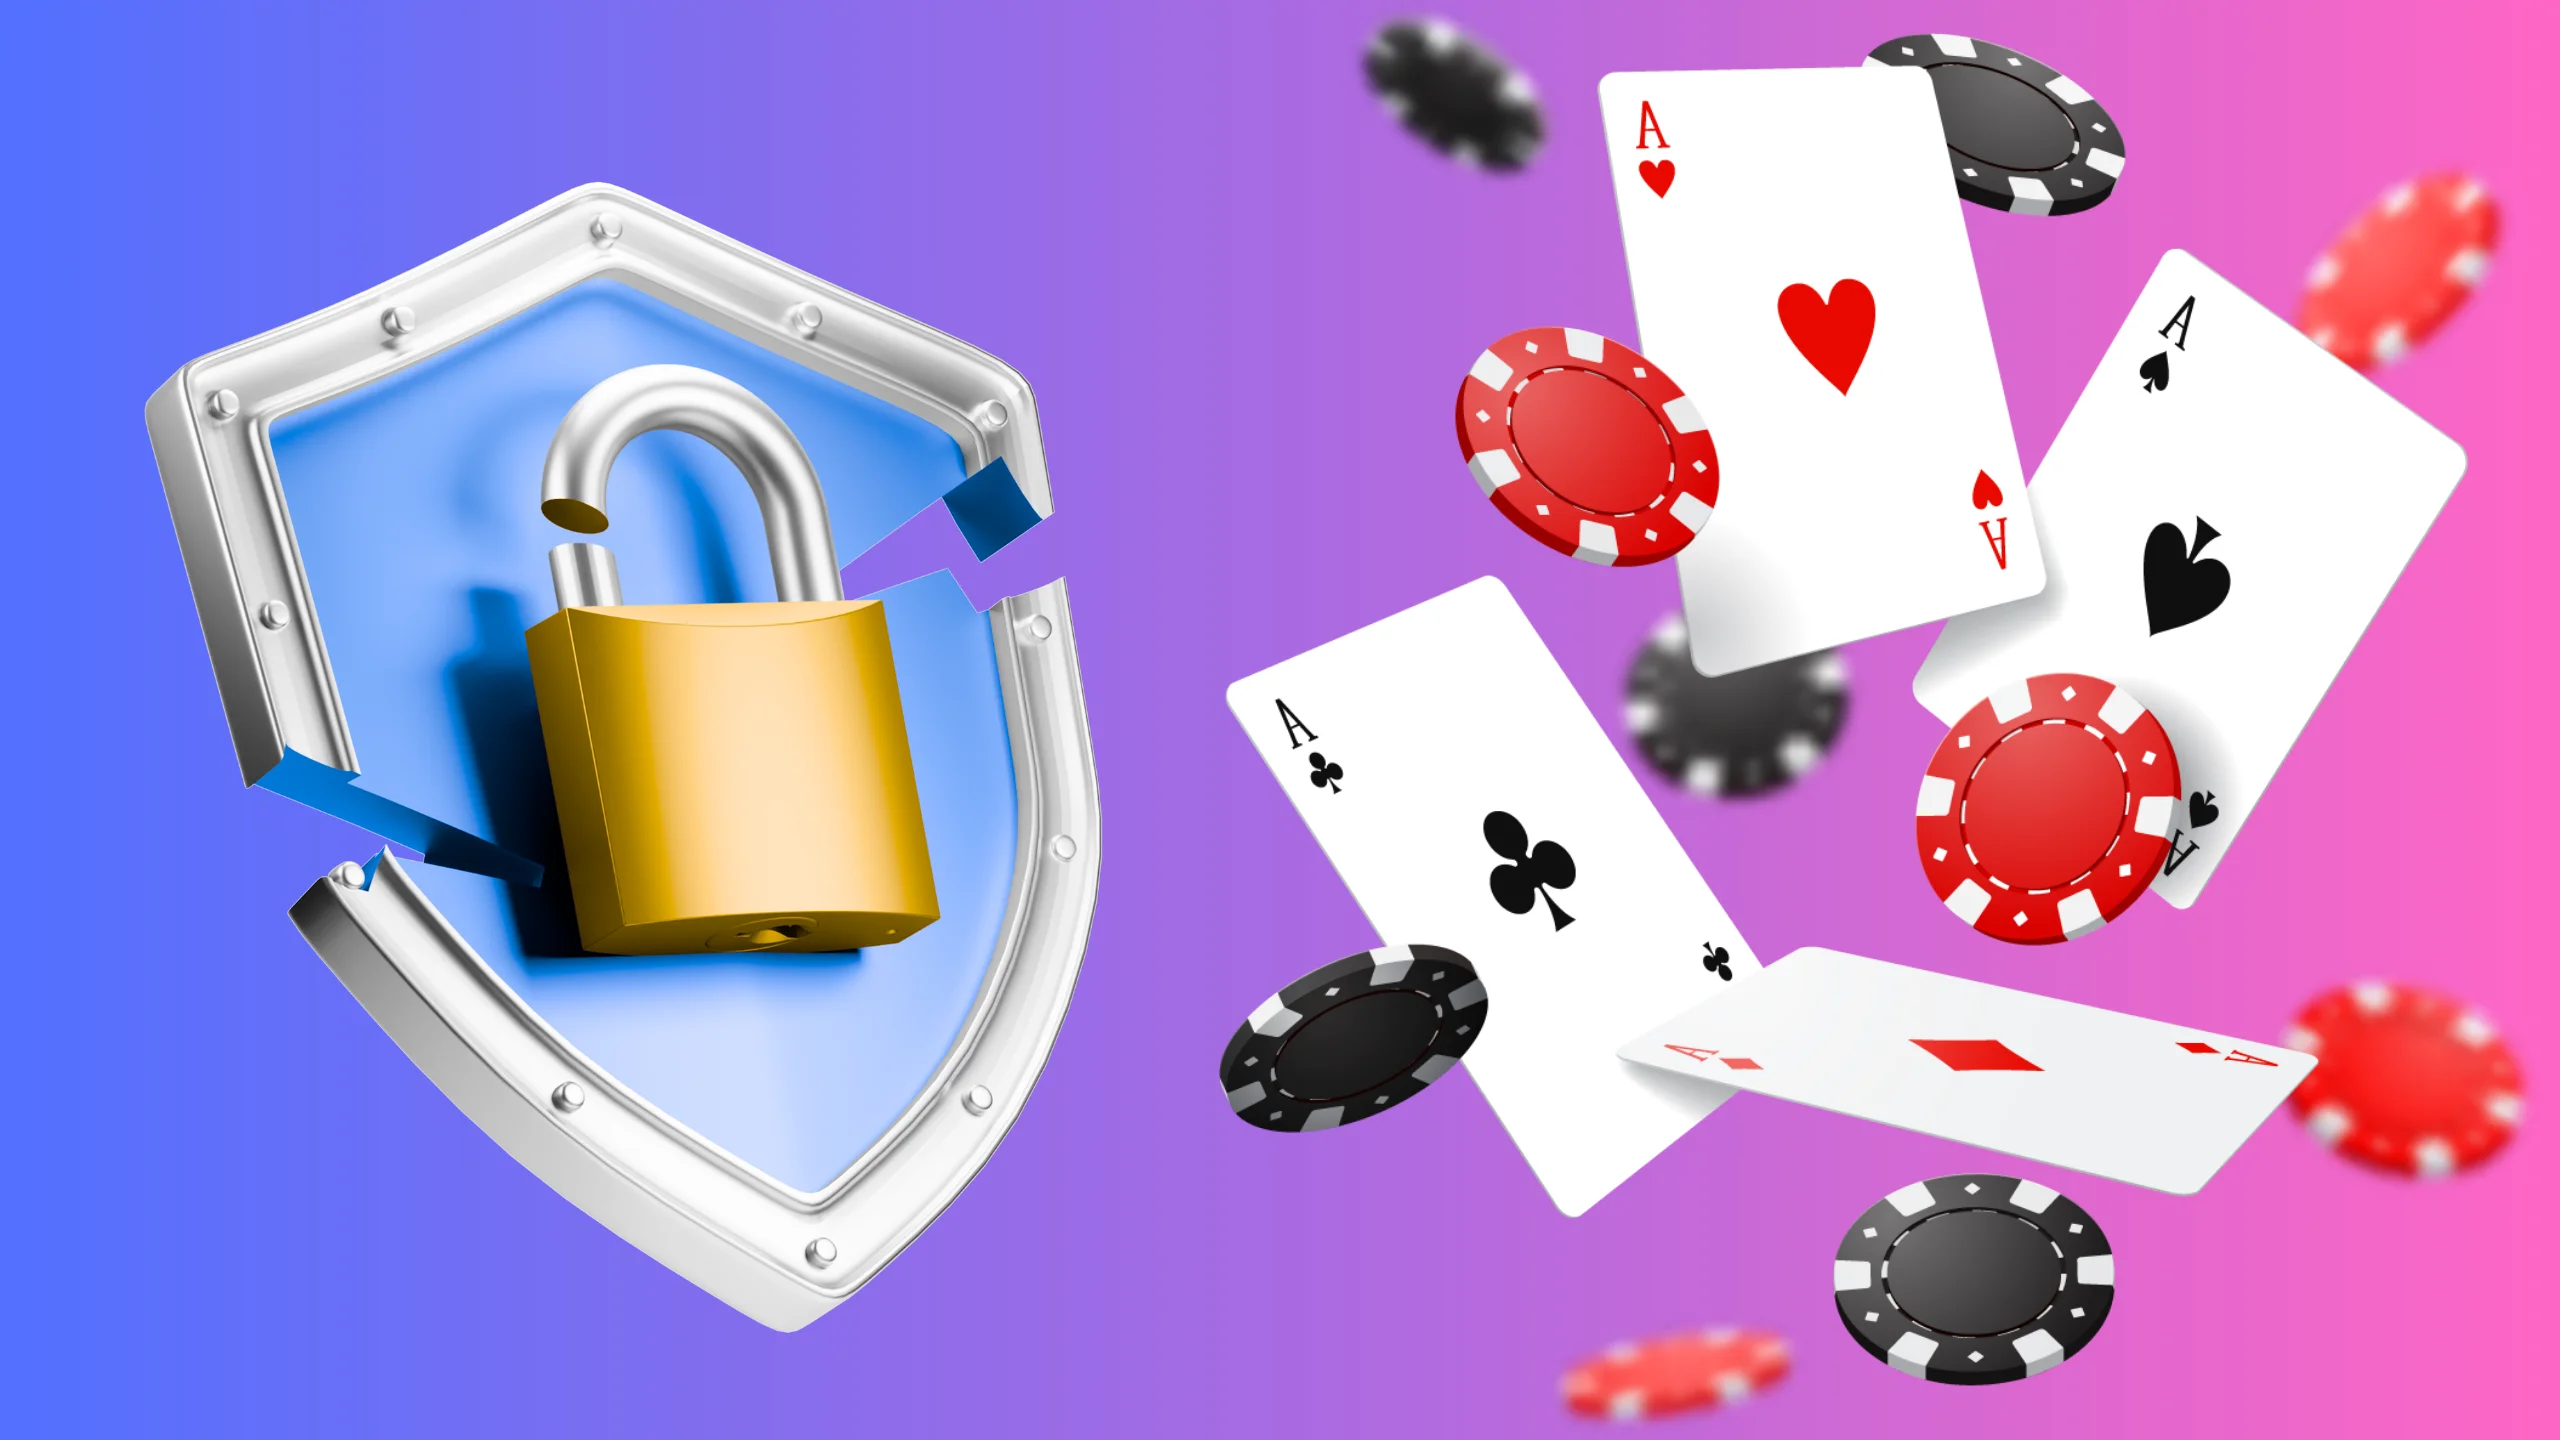 Illustration of AI's role in improving security and fair play in poker games, featuring advanced algorithms for detecting cheating, real-time monitoring, and secure player authentication. Highlights AI-driven measures to enhance game integrity and player experience.